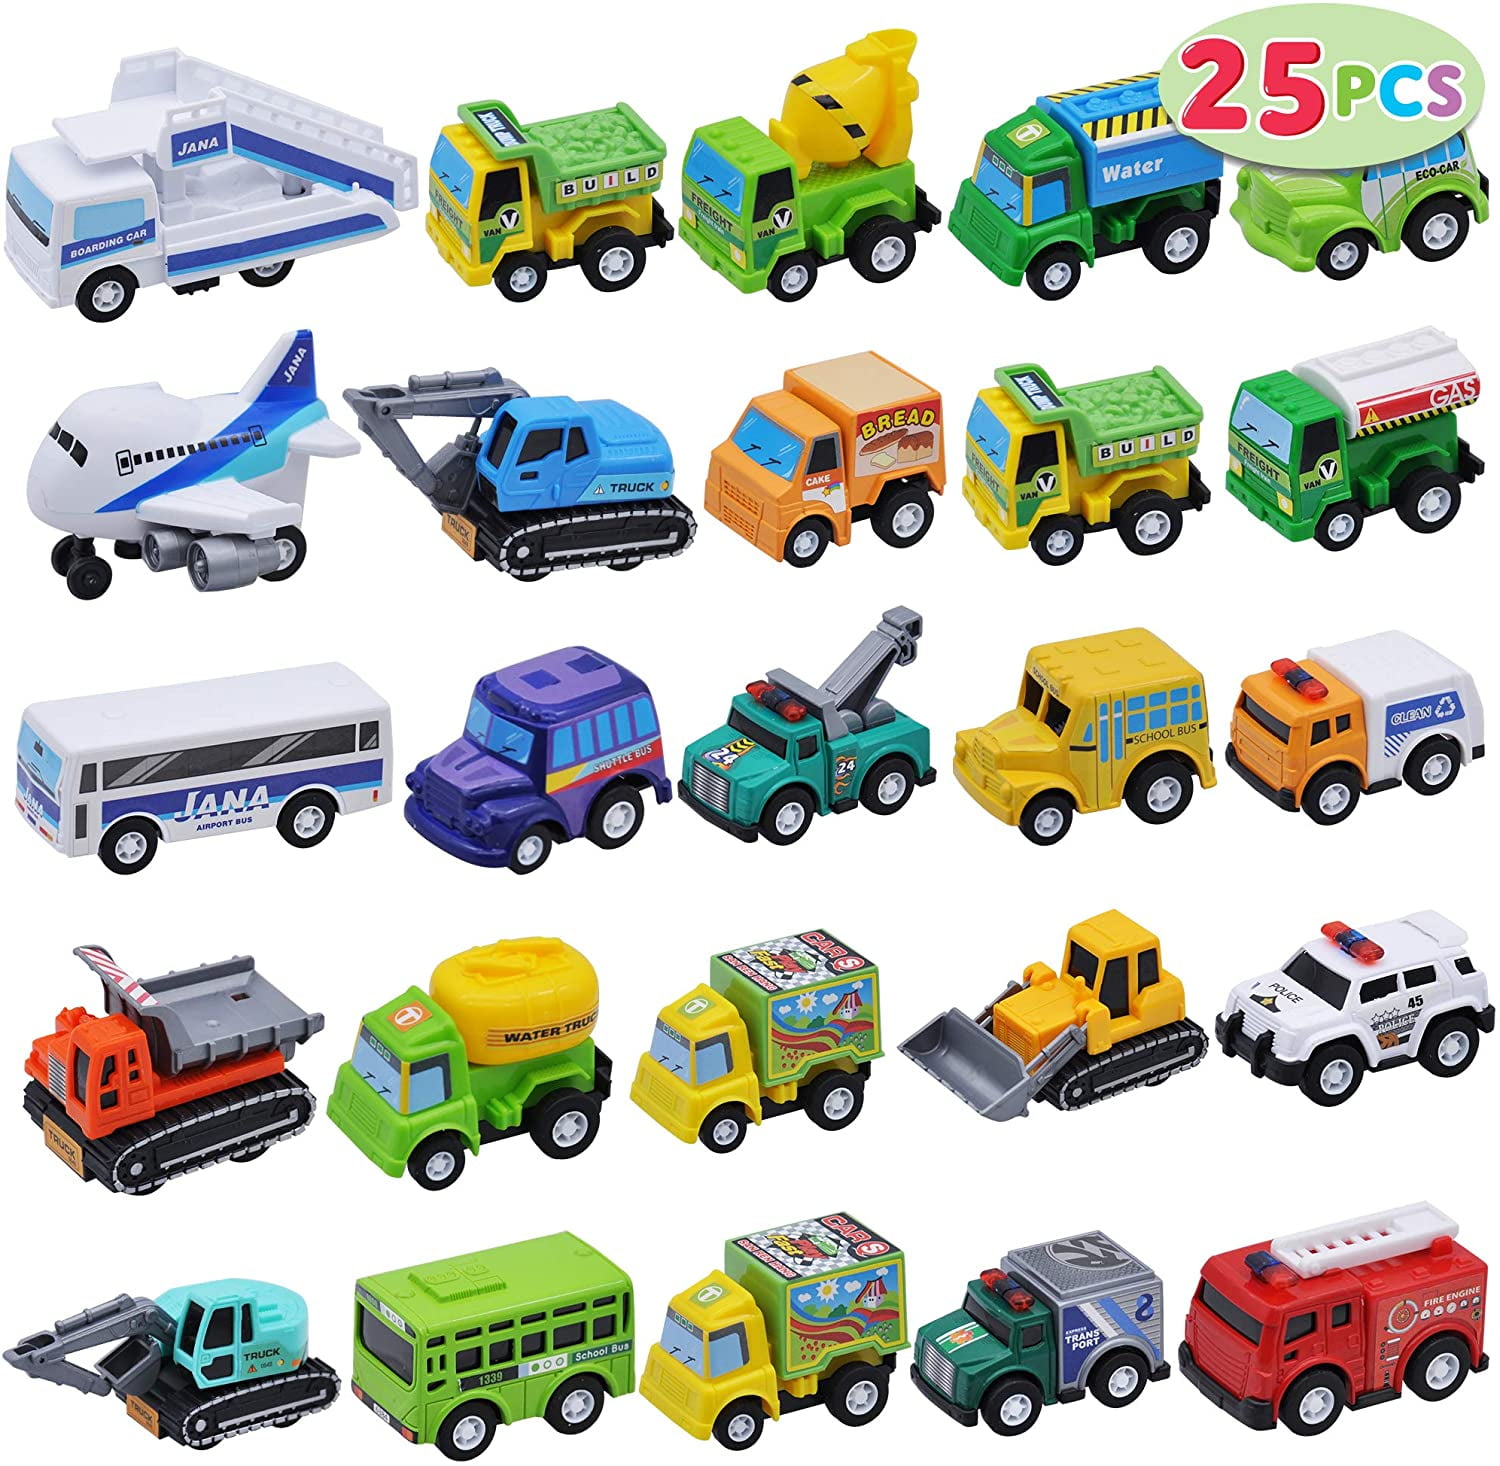 Toy vehicles for kids powermatic 3 plus